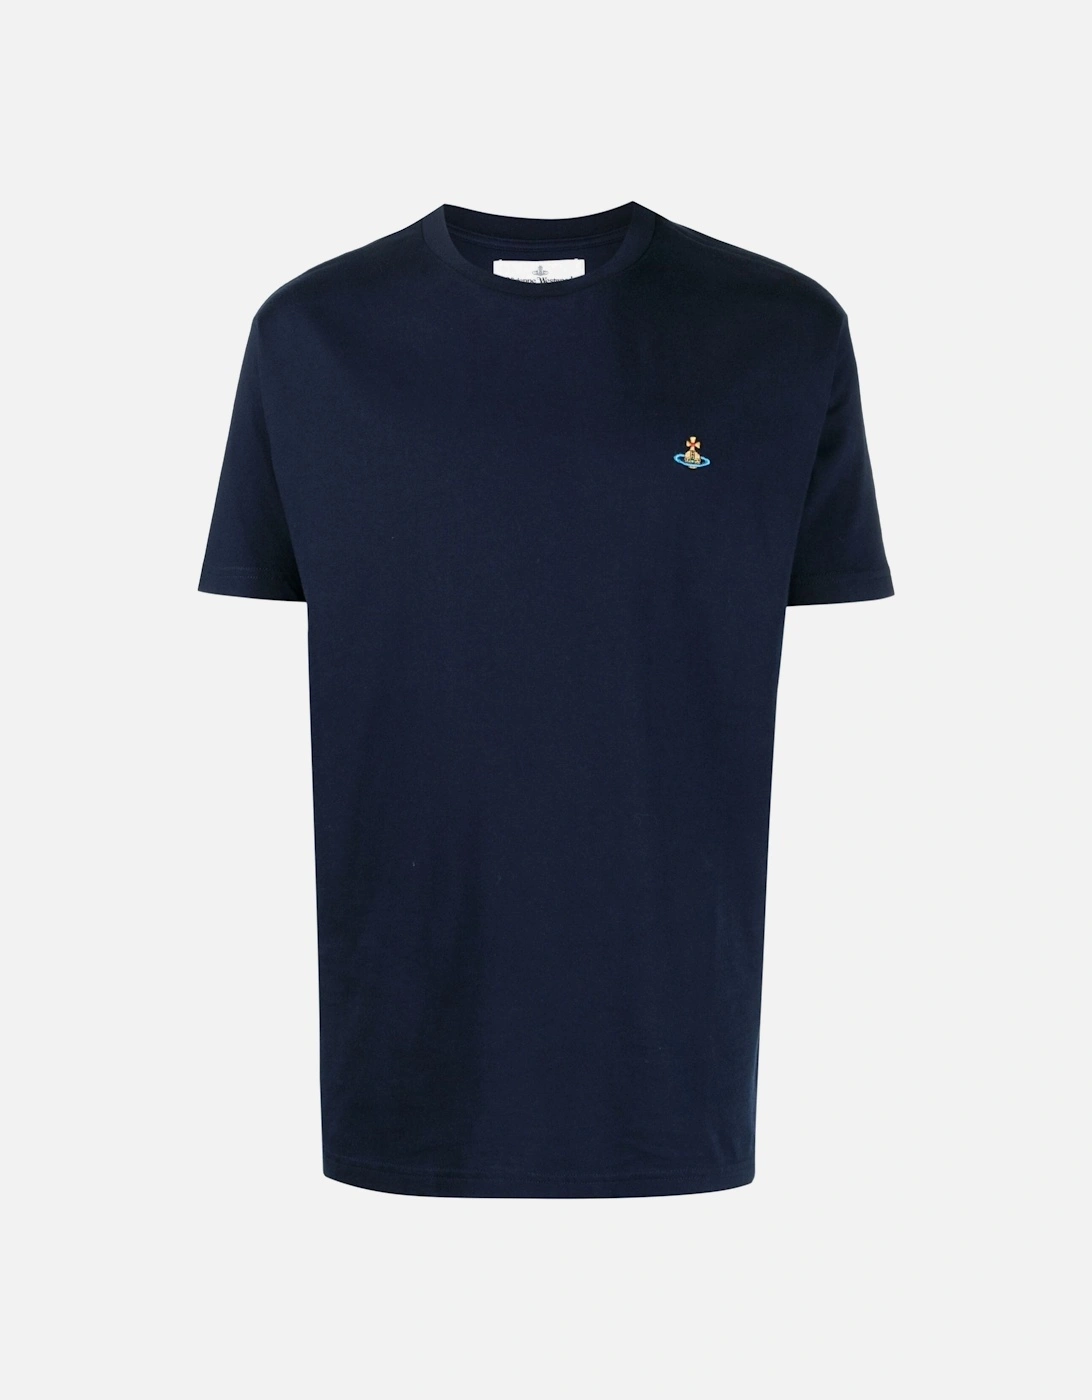 Classic Mutlicoloured Orb T-shirt Navy, 6 of 5